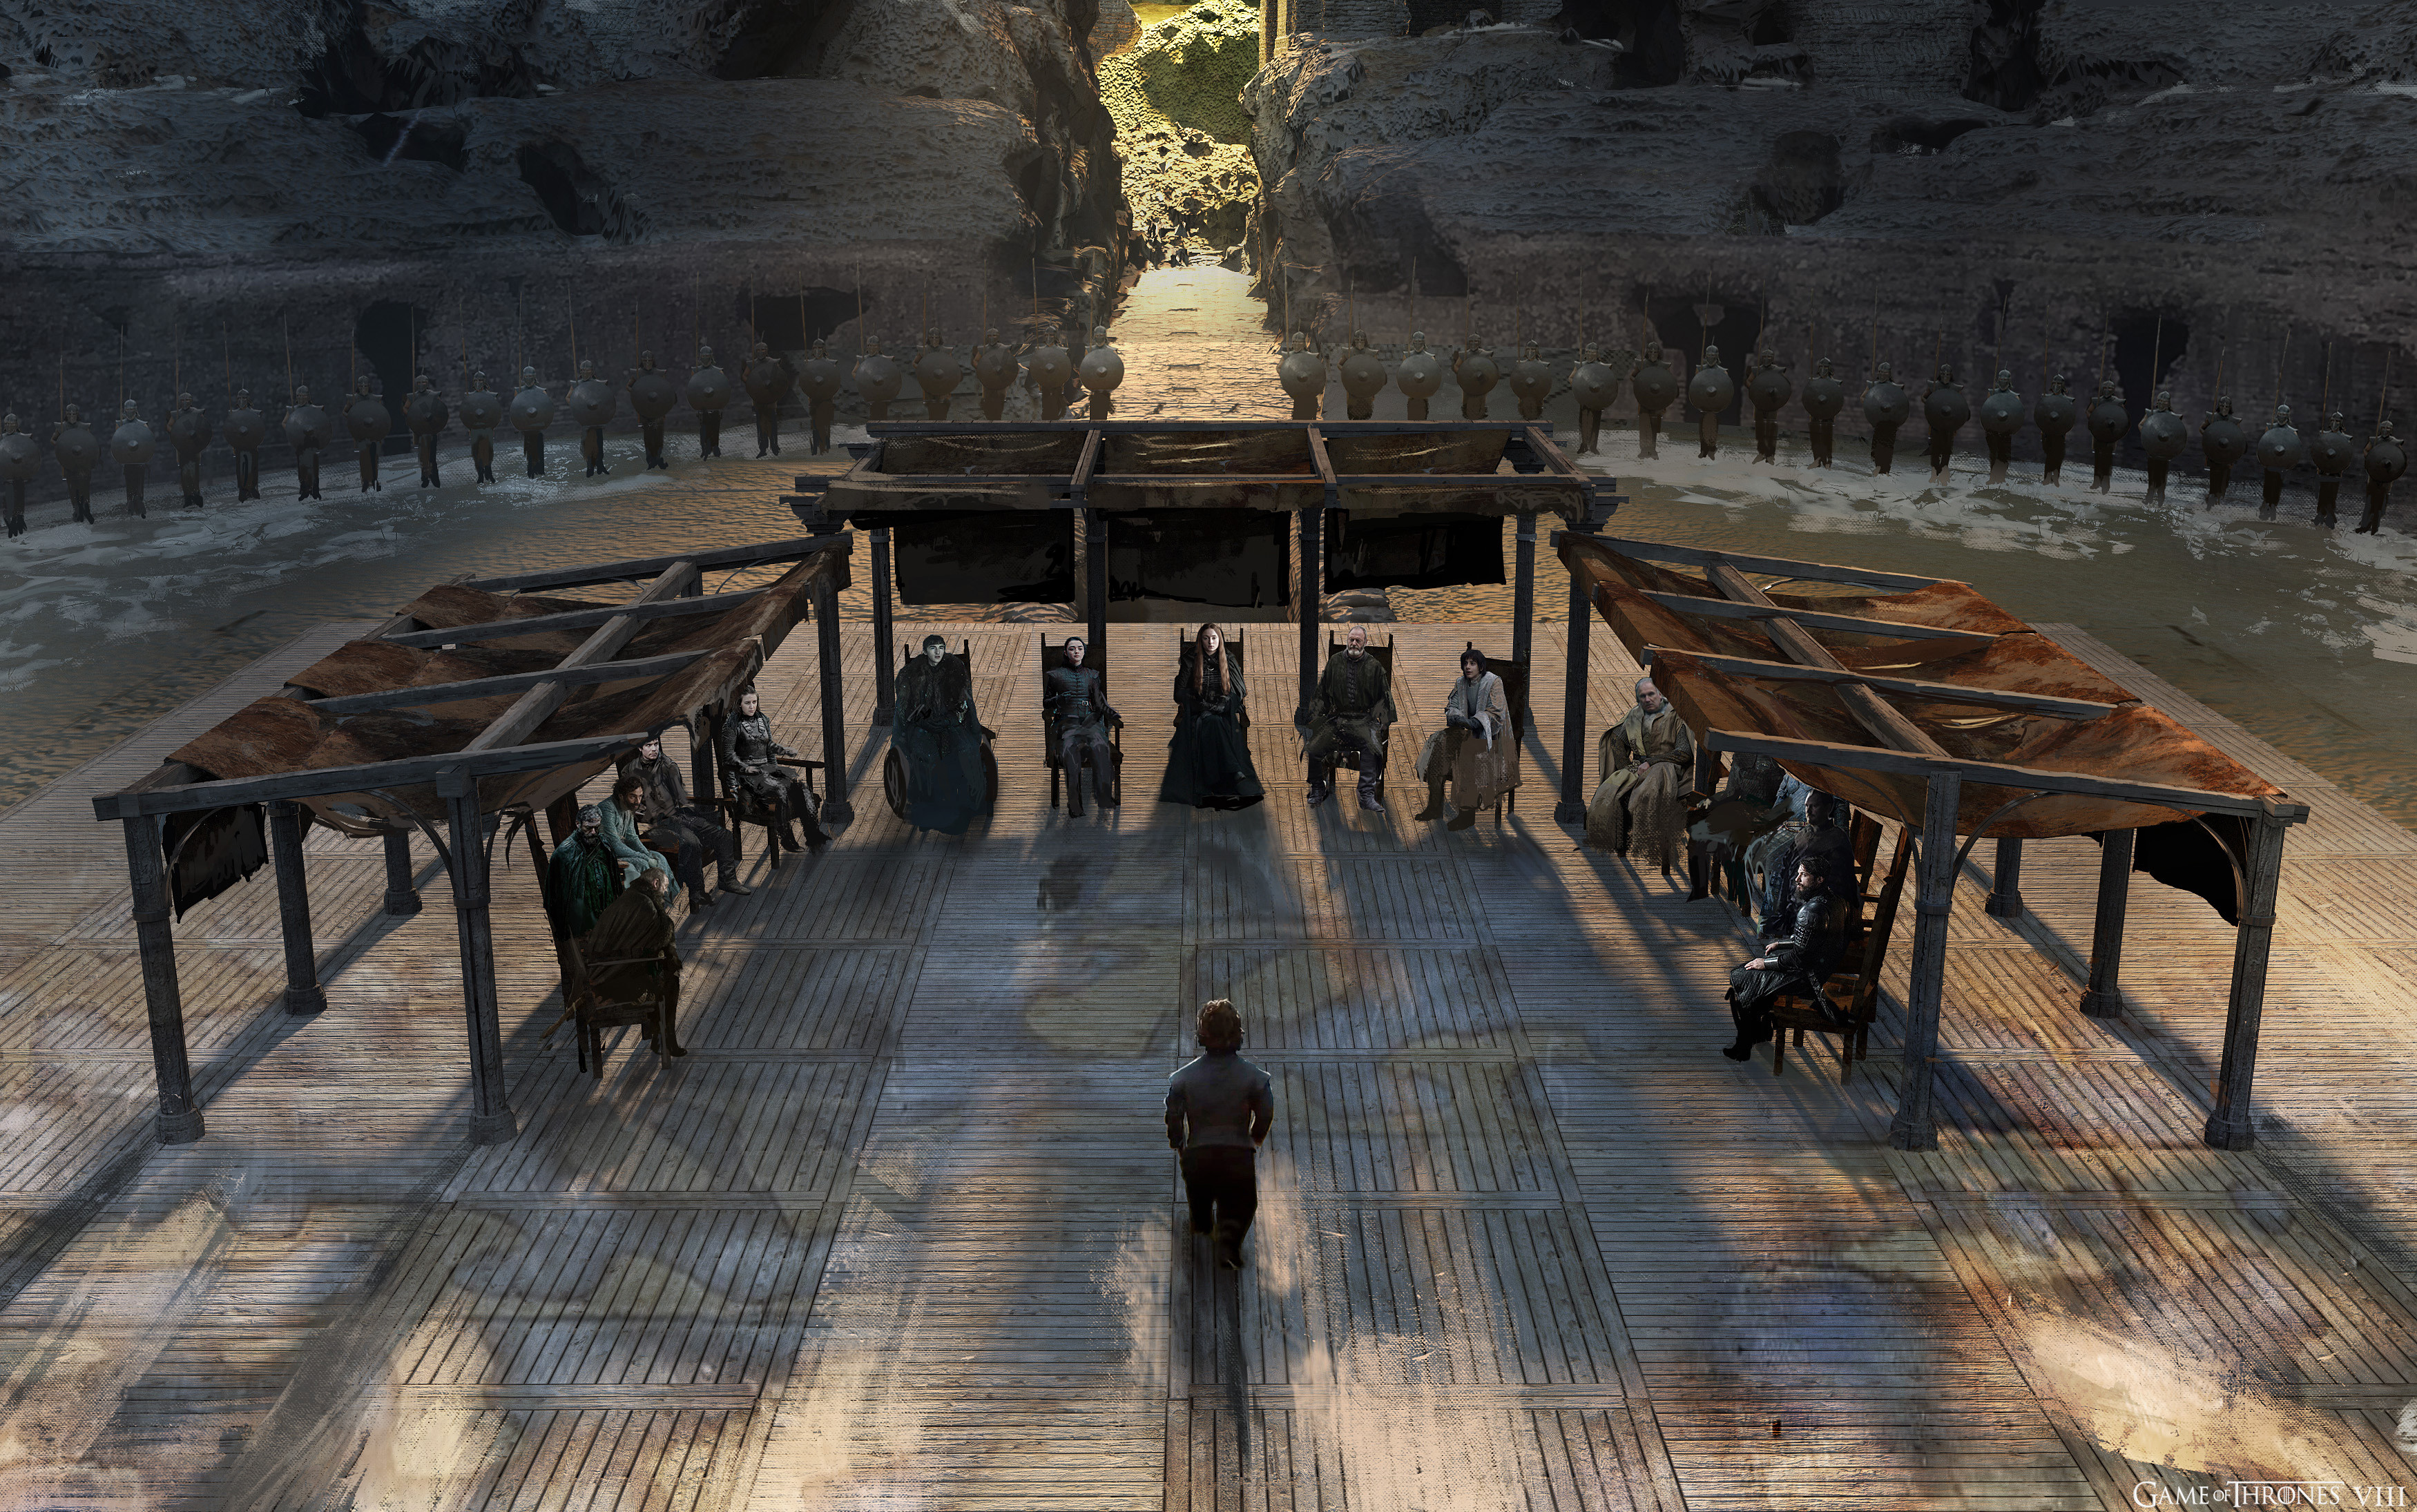 Dragonpit Council of Lords, early version using old Pergola design